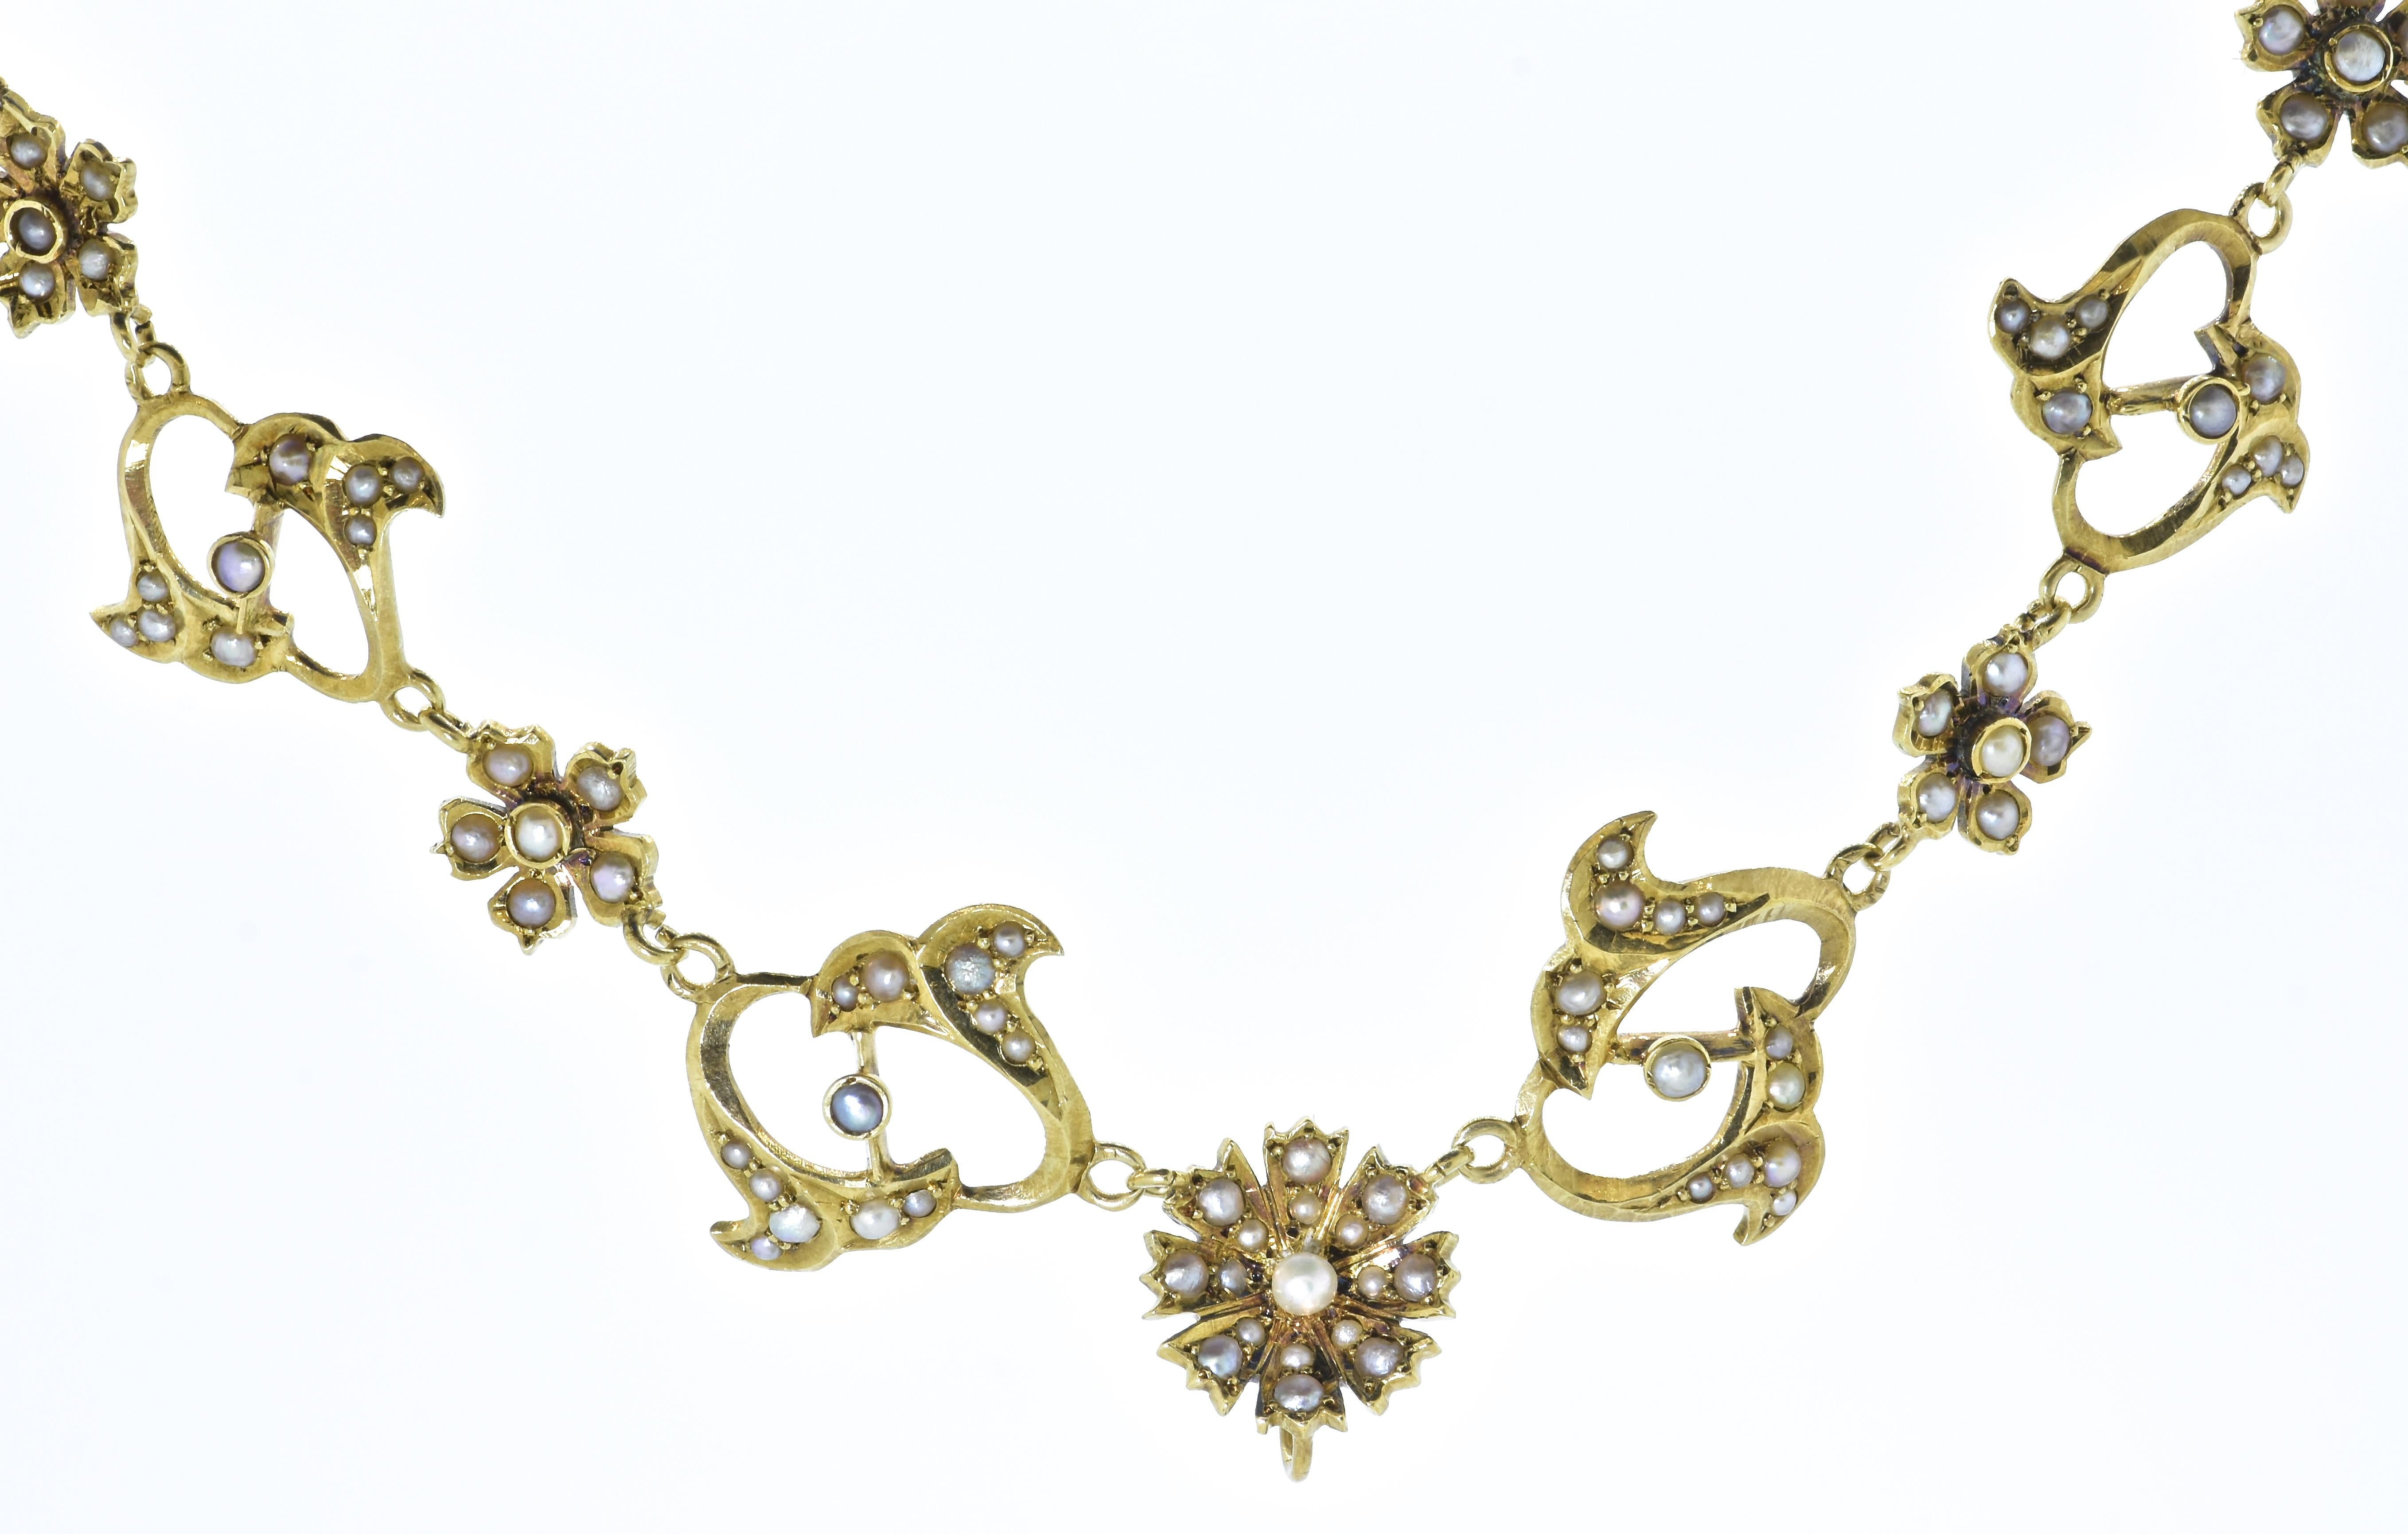 Bead Victorian Necklace/Brooch with Fine Seed Pearls and Gold, circa 1890